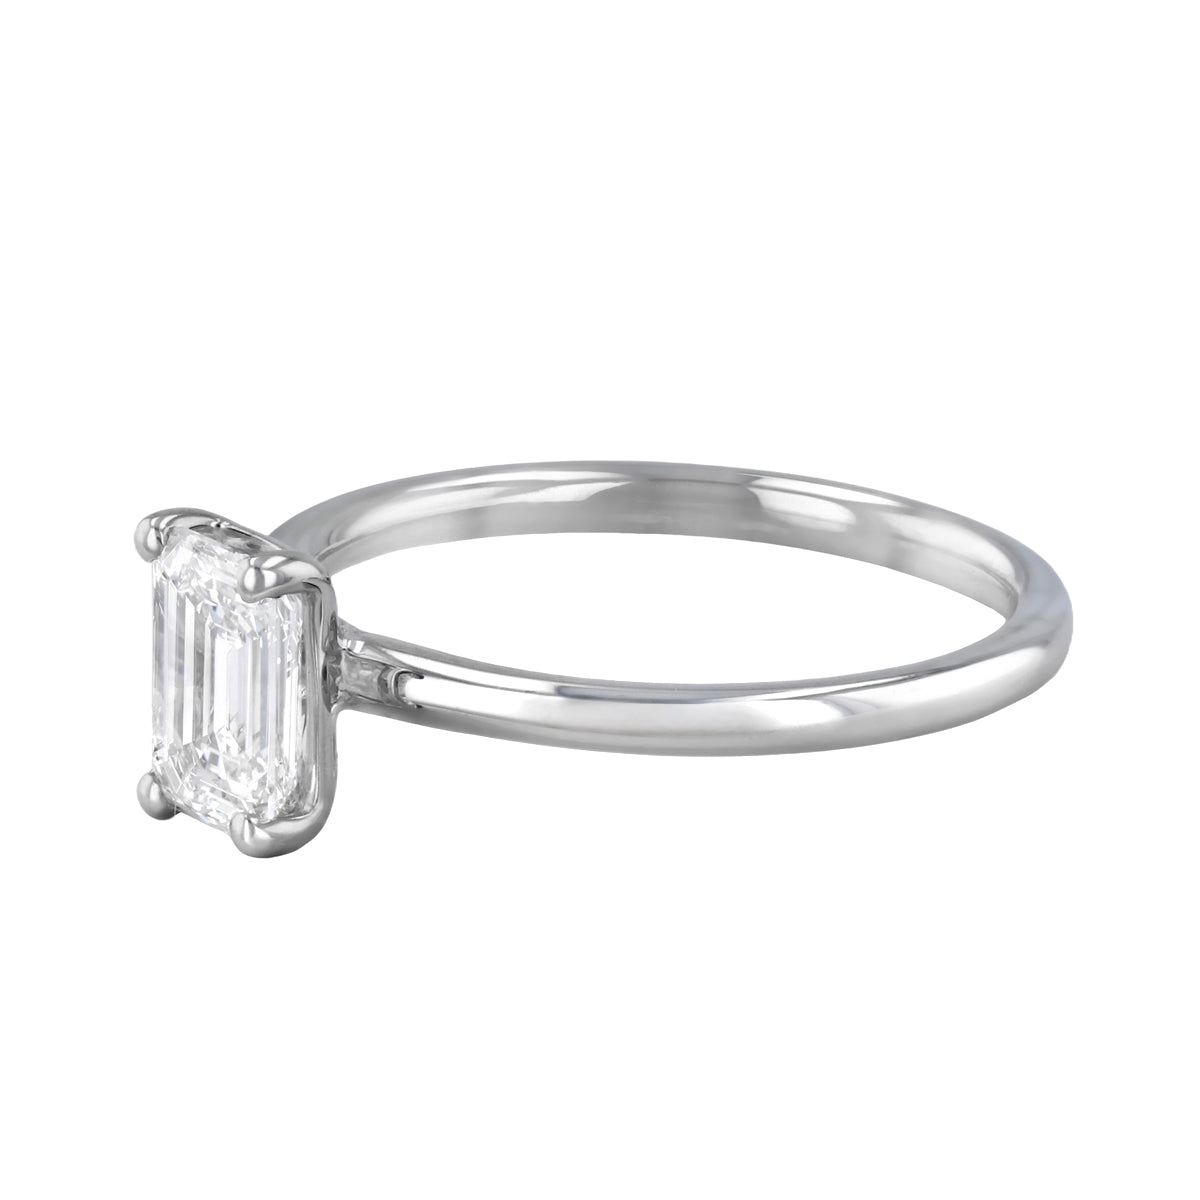 1-20ct-sofia-emerald-cut-solitaire-diamond-engagement-ring-18ct-white-gold